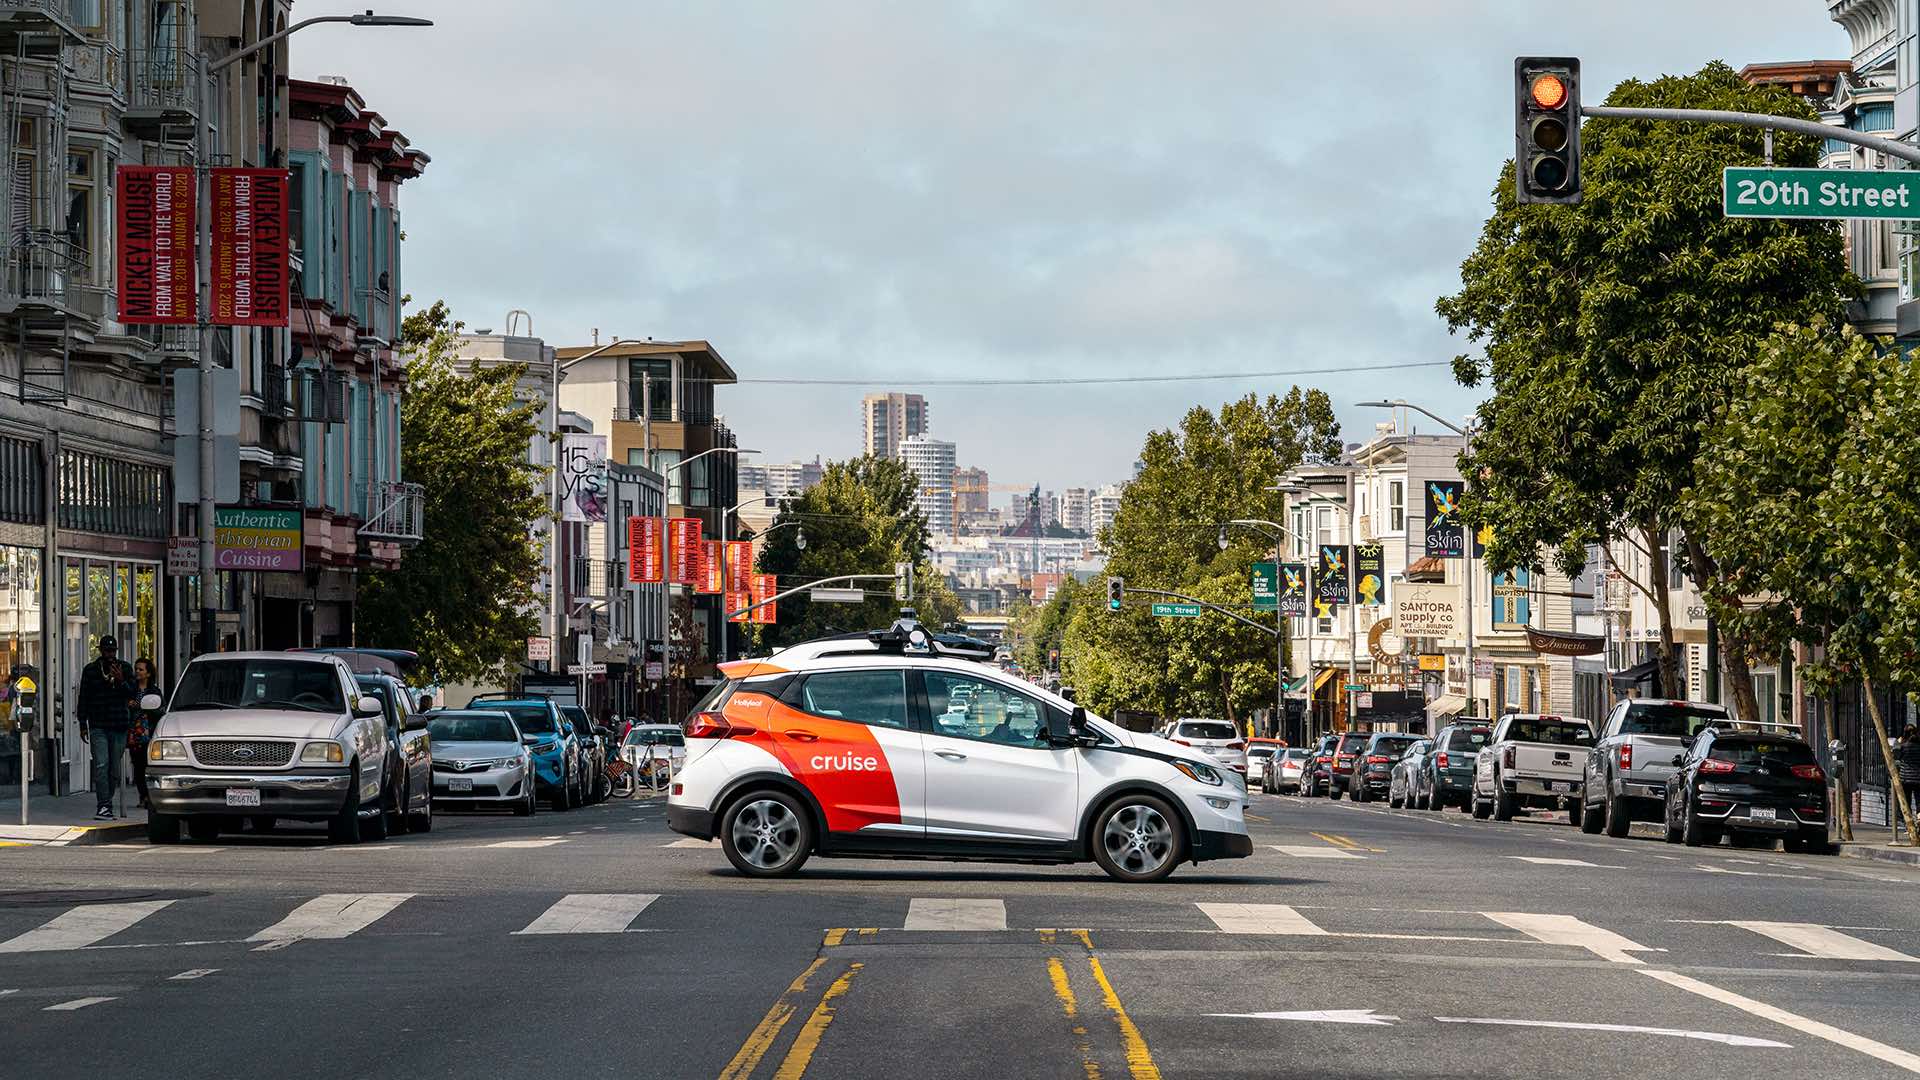 A Cruise self-driving car blocked the way for firefighters in San Francisco